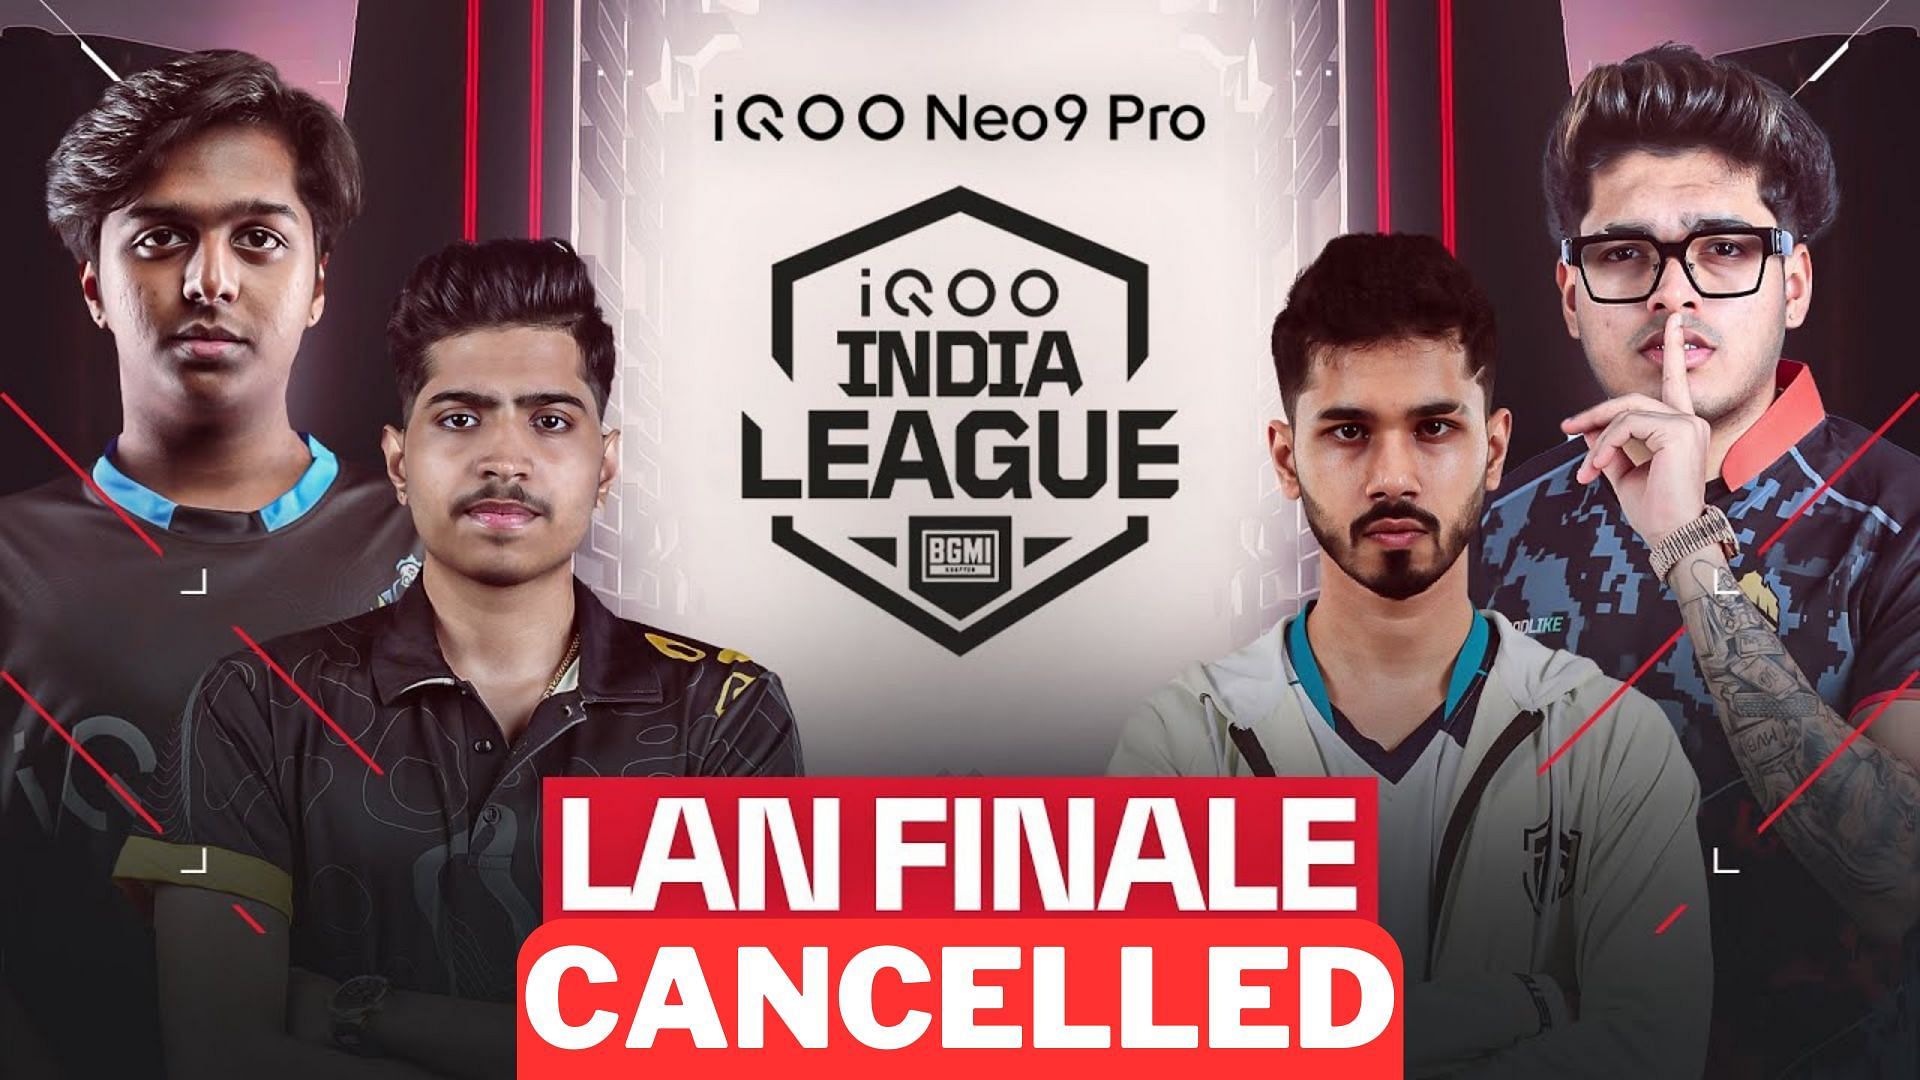 iQOO BGMI India League has been cancelled due to technical problems (Image via iQOO)